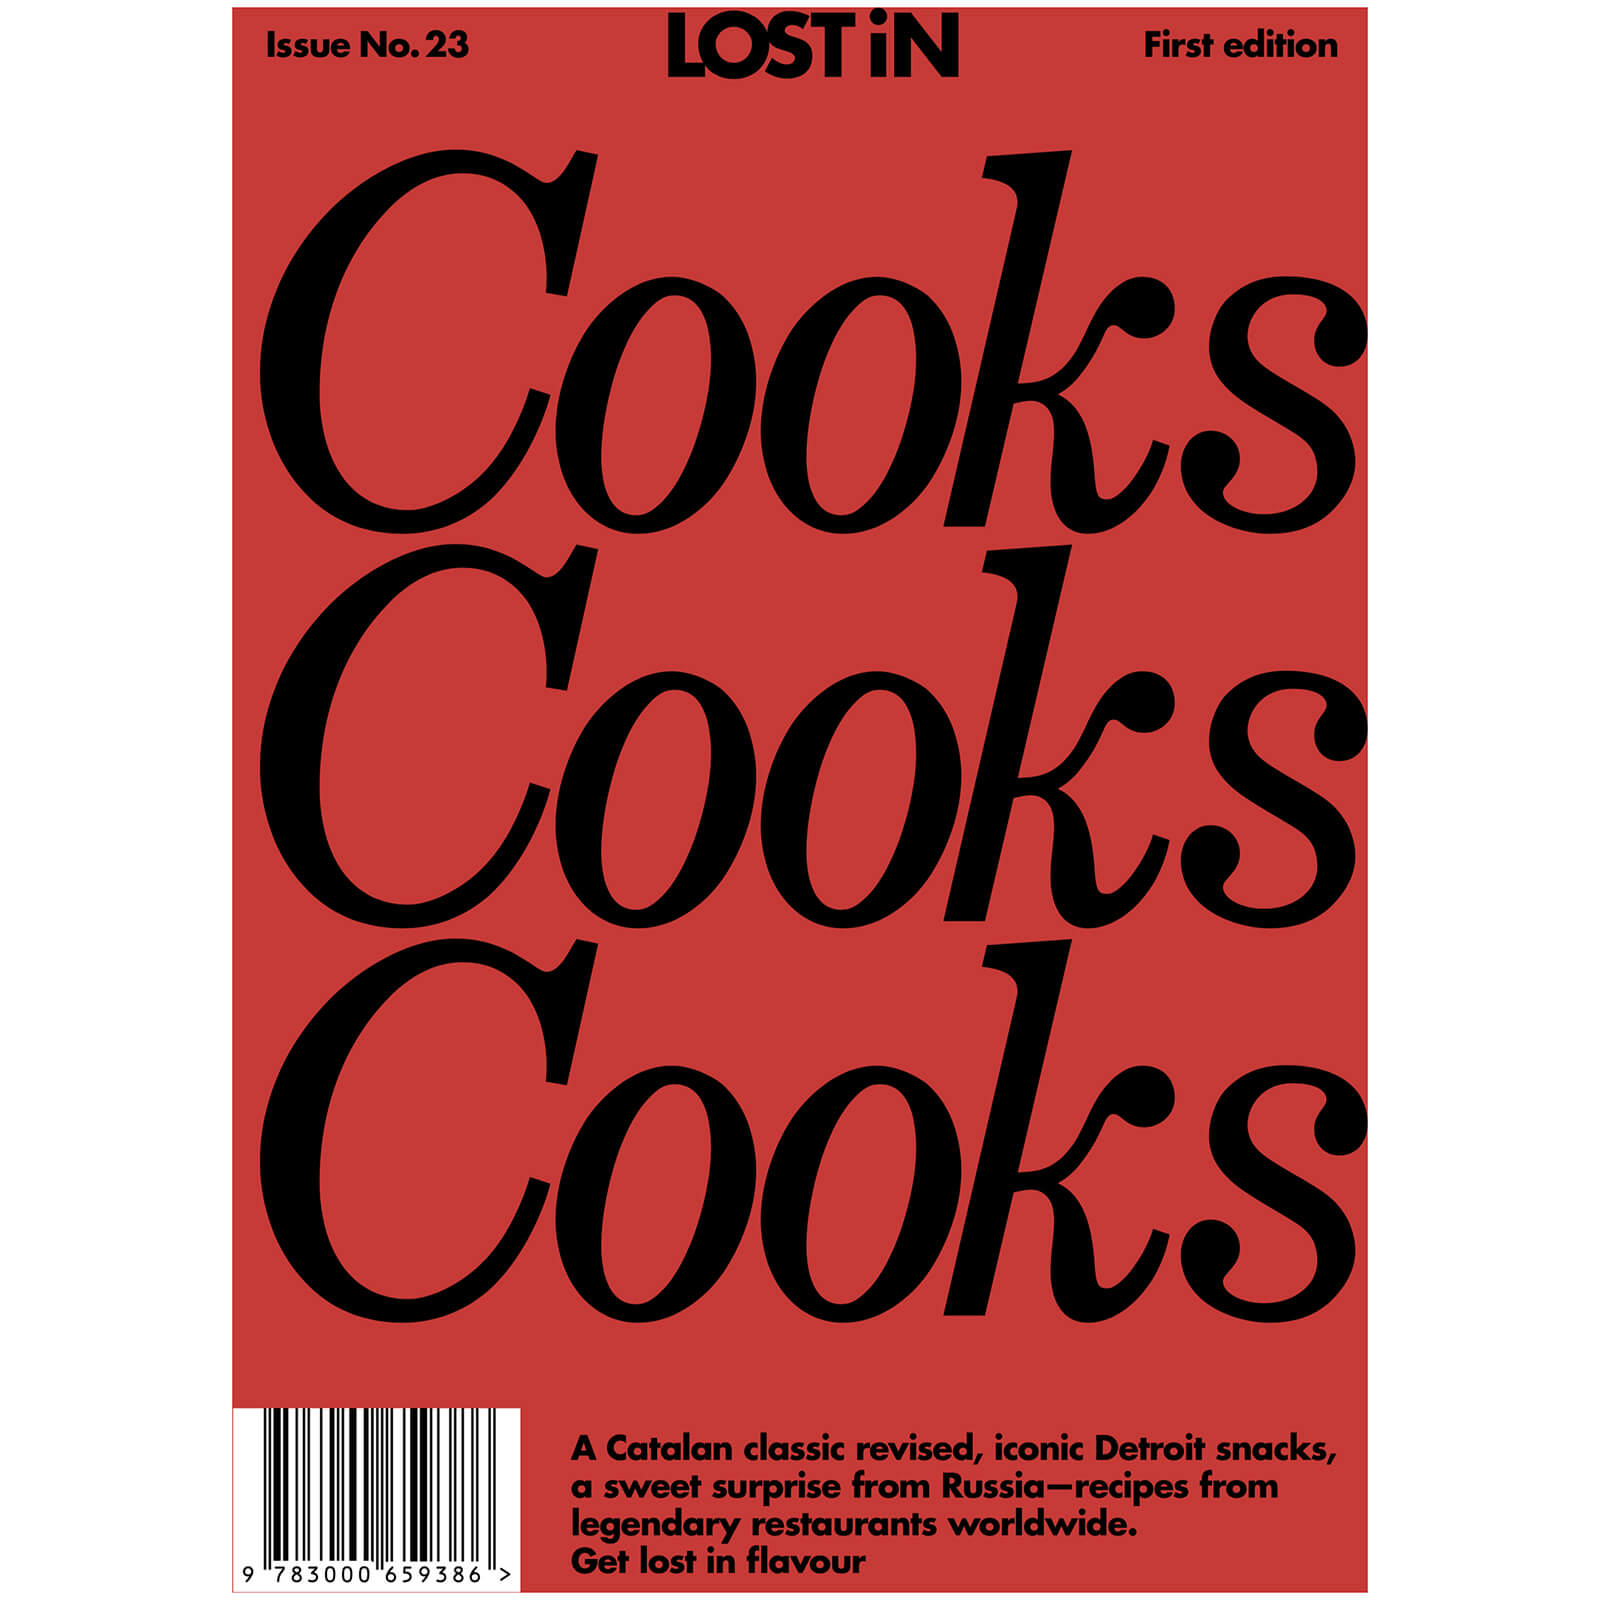 Lost In: Cooks